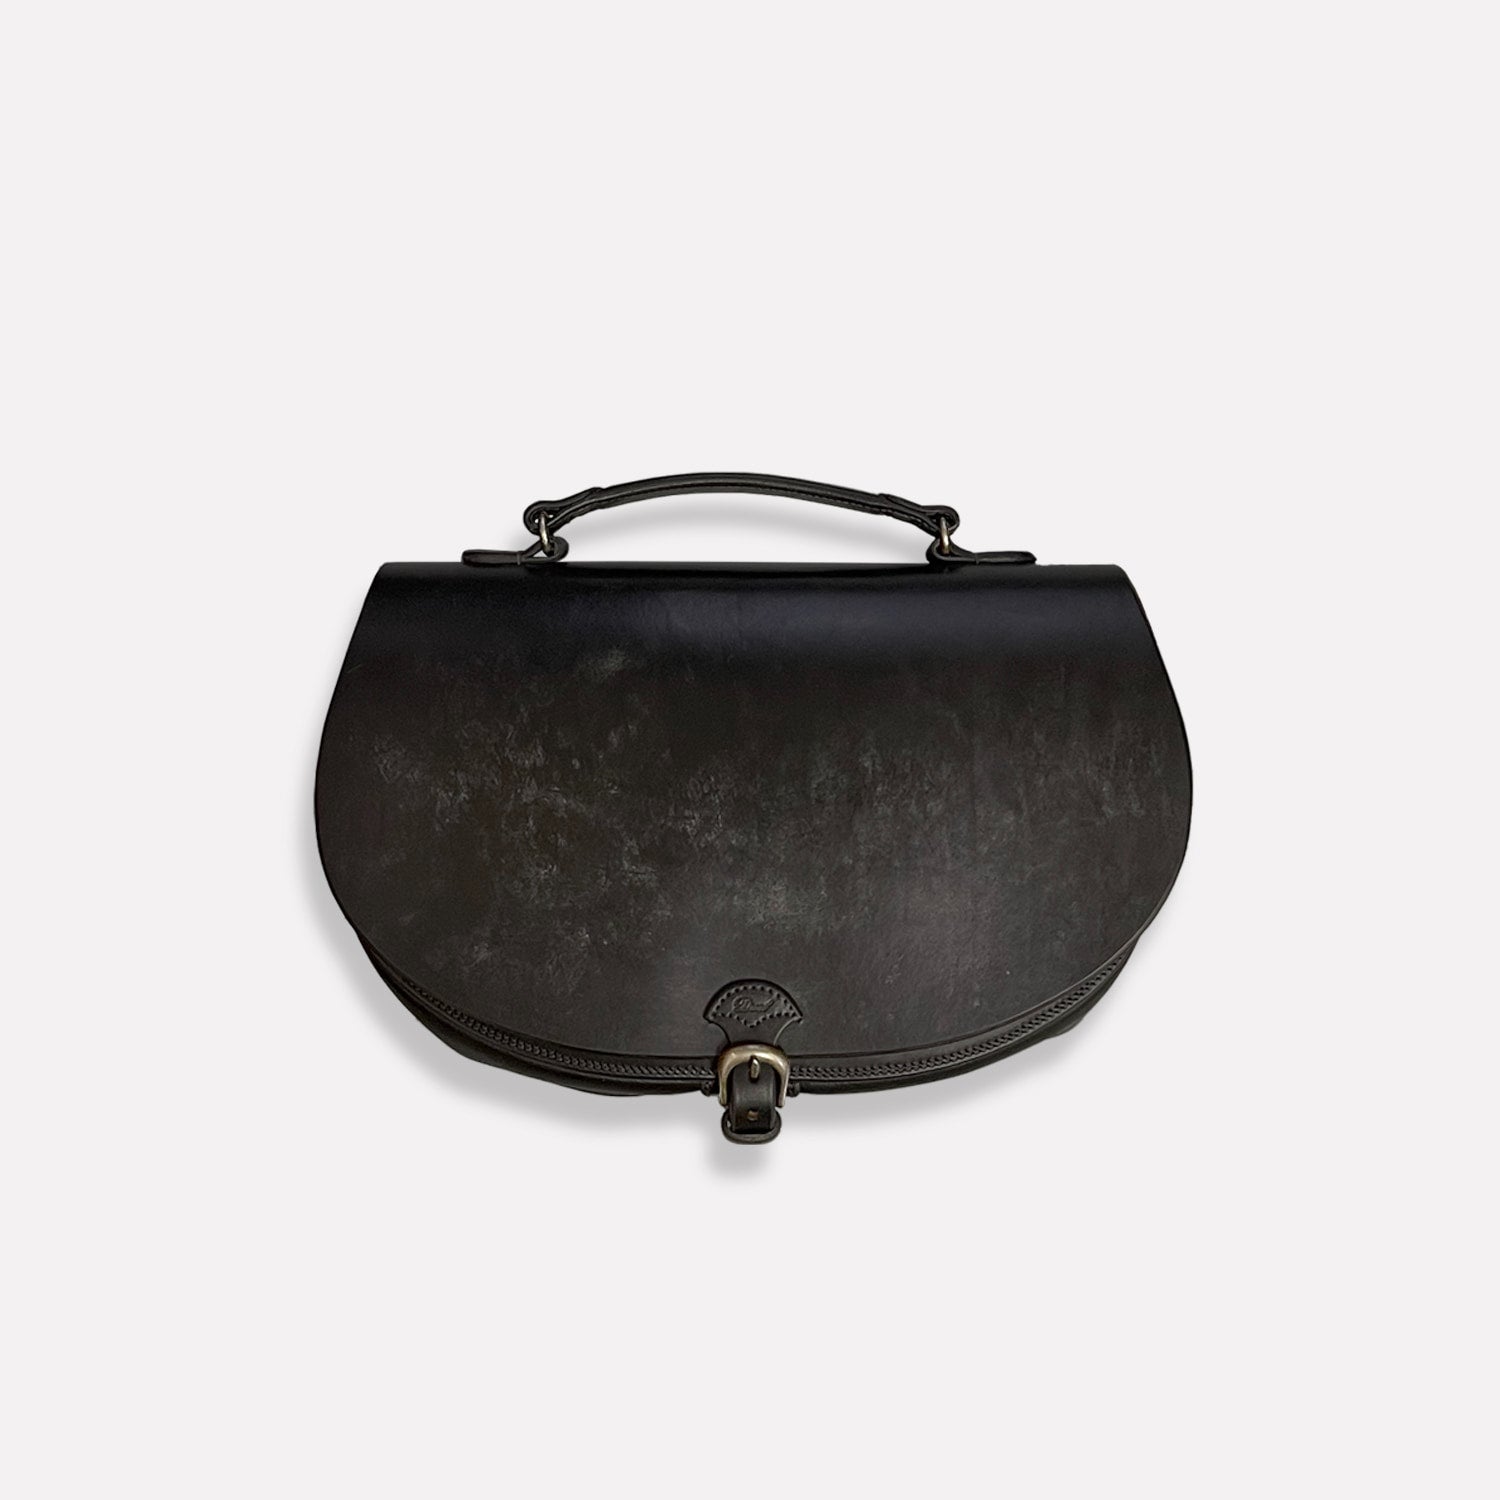 Dual / Ikenohata Ginzaten The finest saddle leather made by a long-established British tanner. Classic 2way shoulder bag 